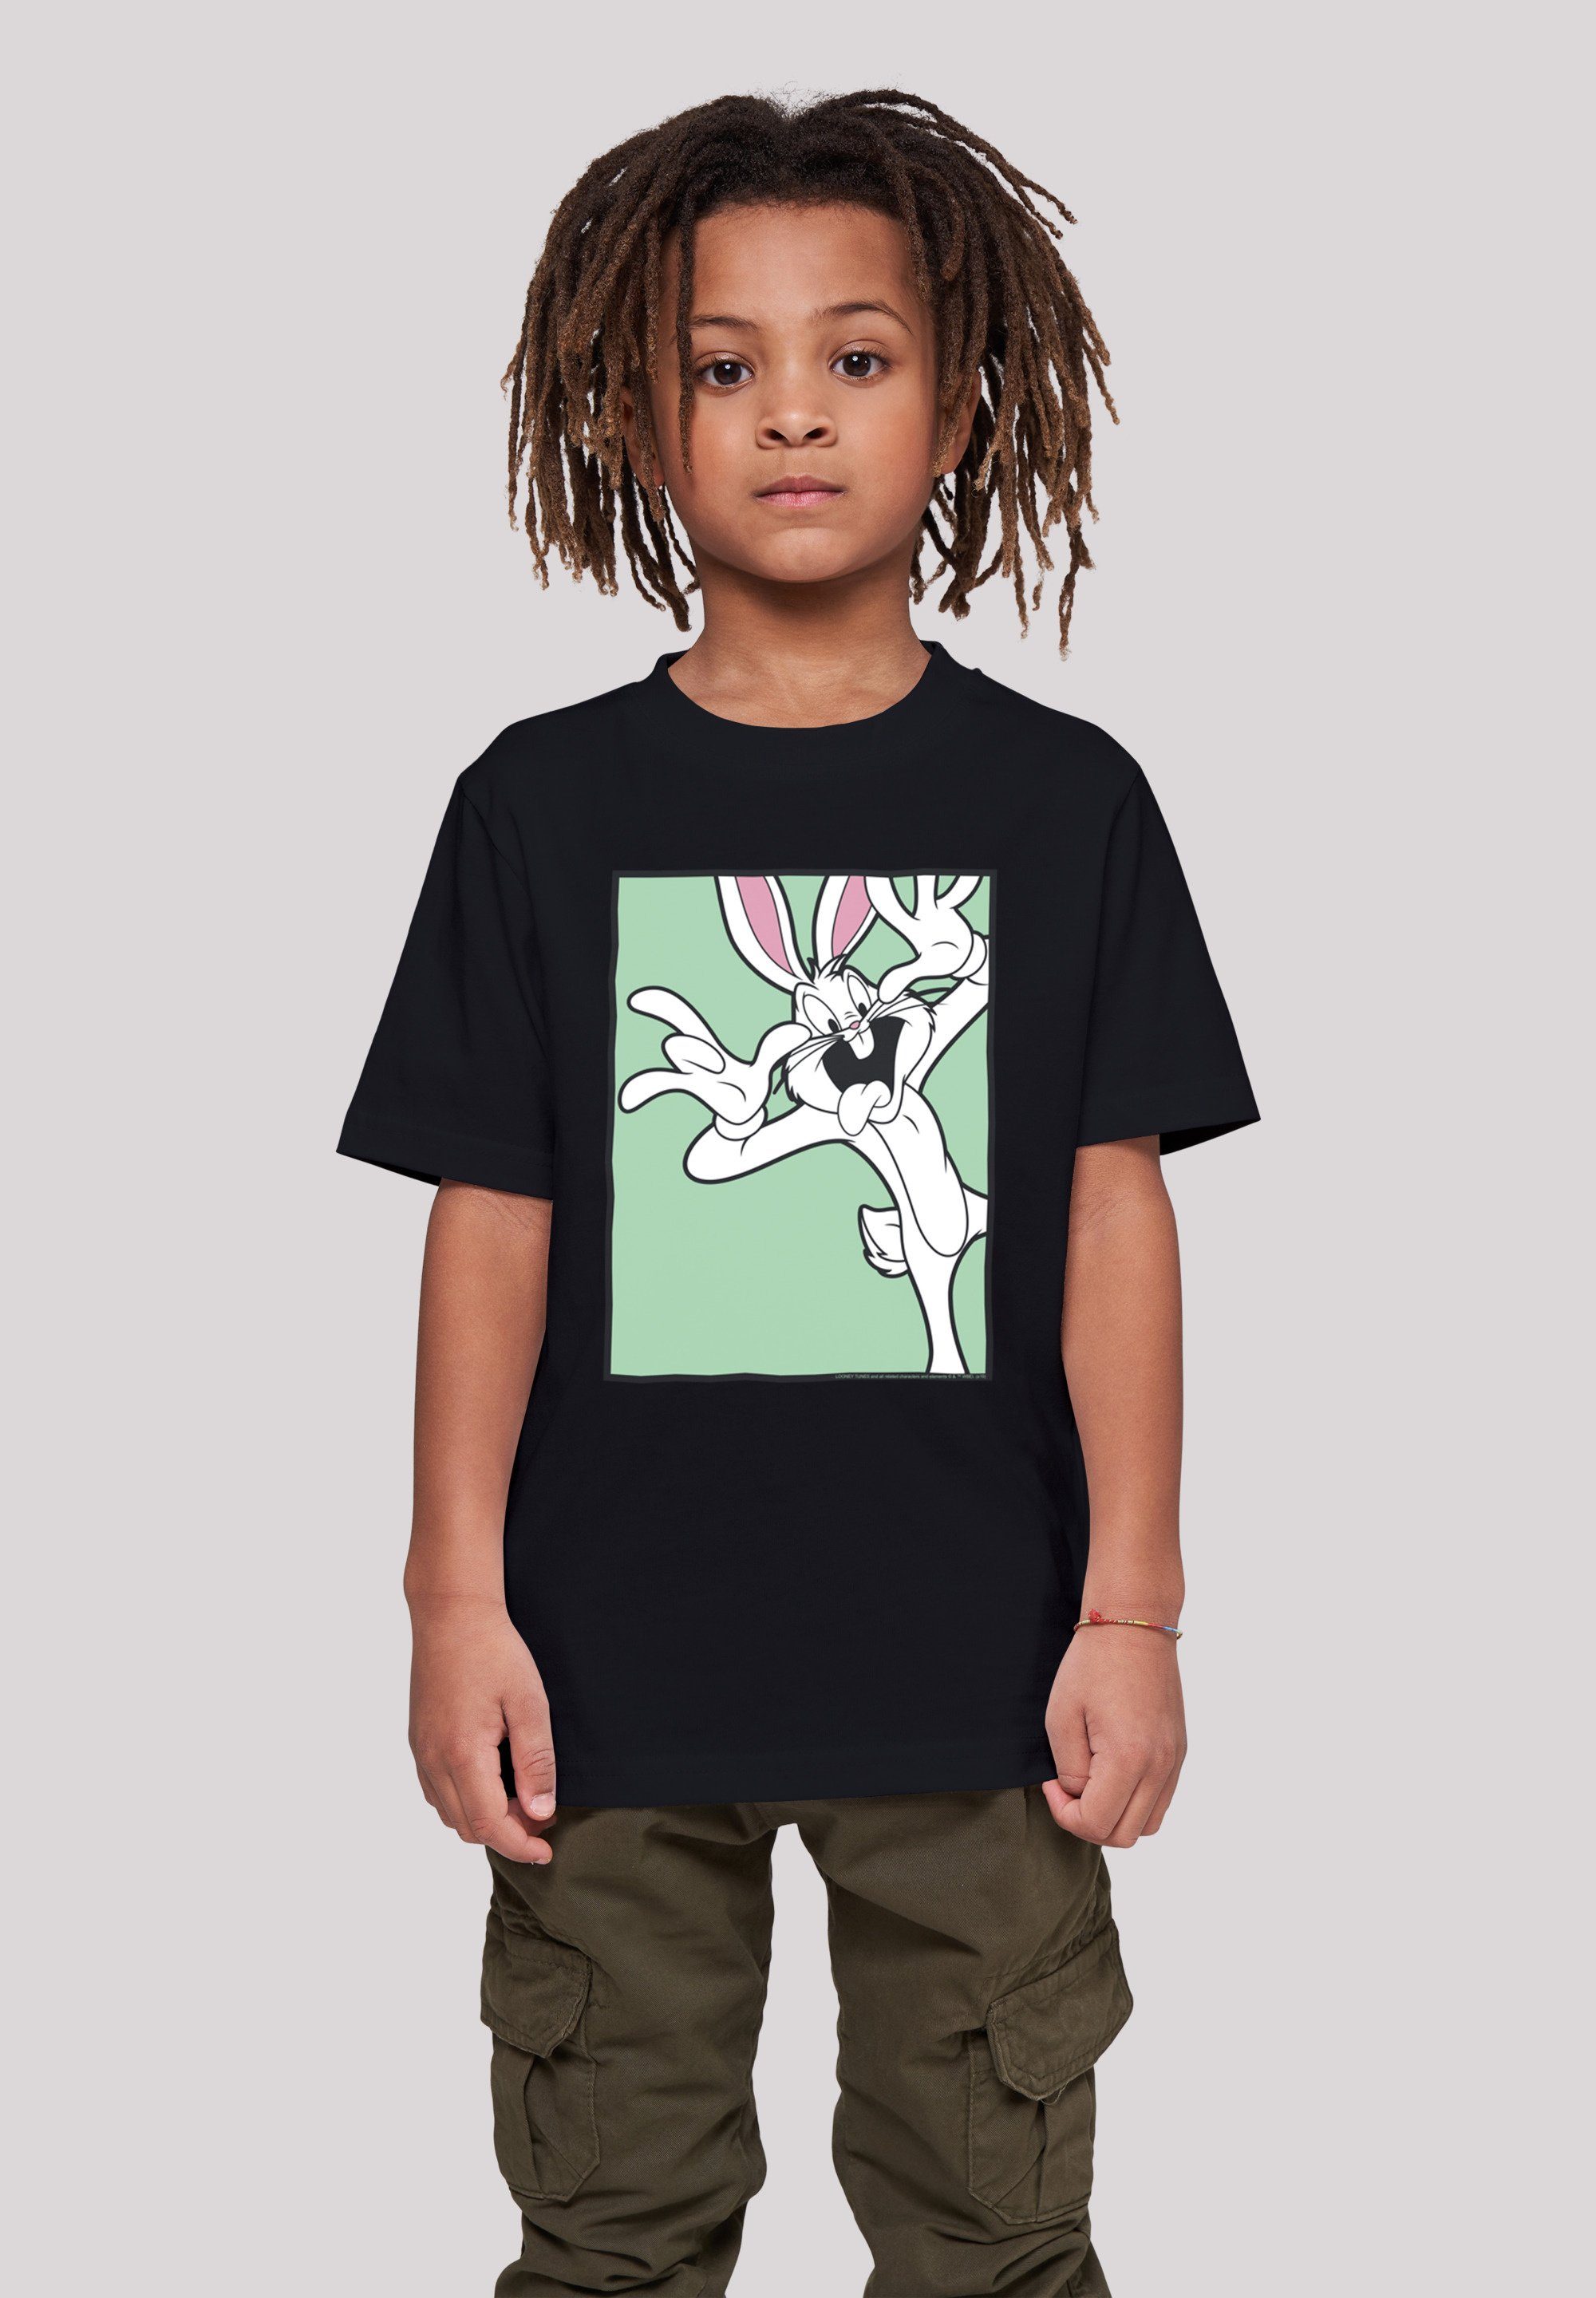 F4NT4STIC T-Shirt Tunes Print, Tunes Face Looney Bunny Offiziell Looney Bugs Funny T-Shirt lizenziertes